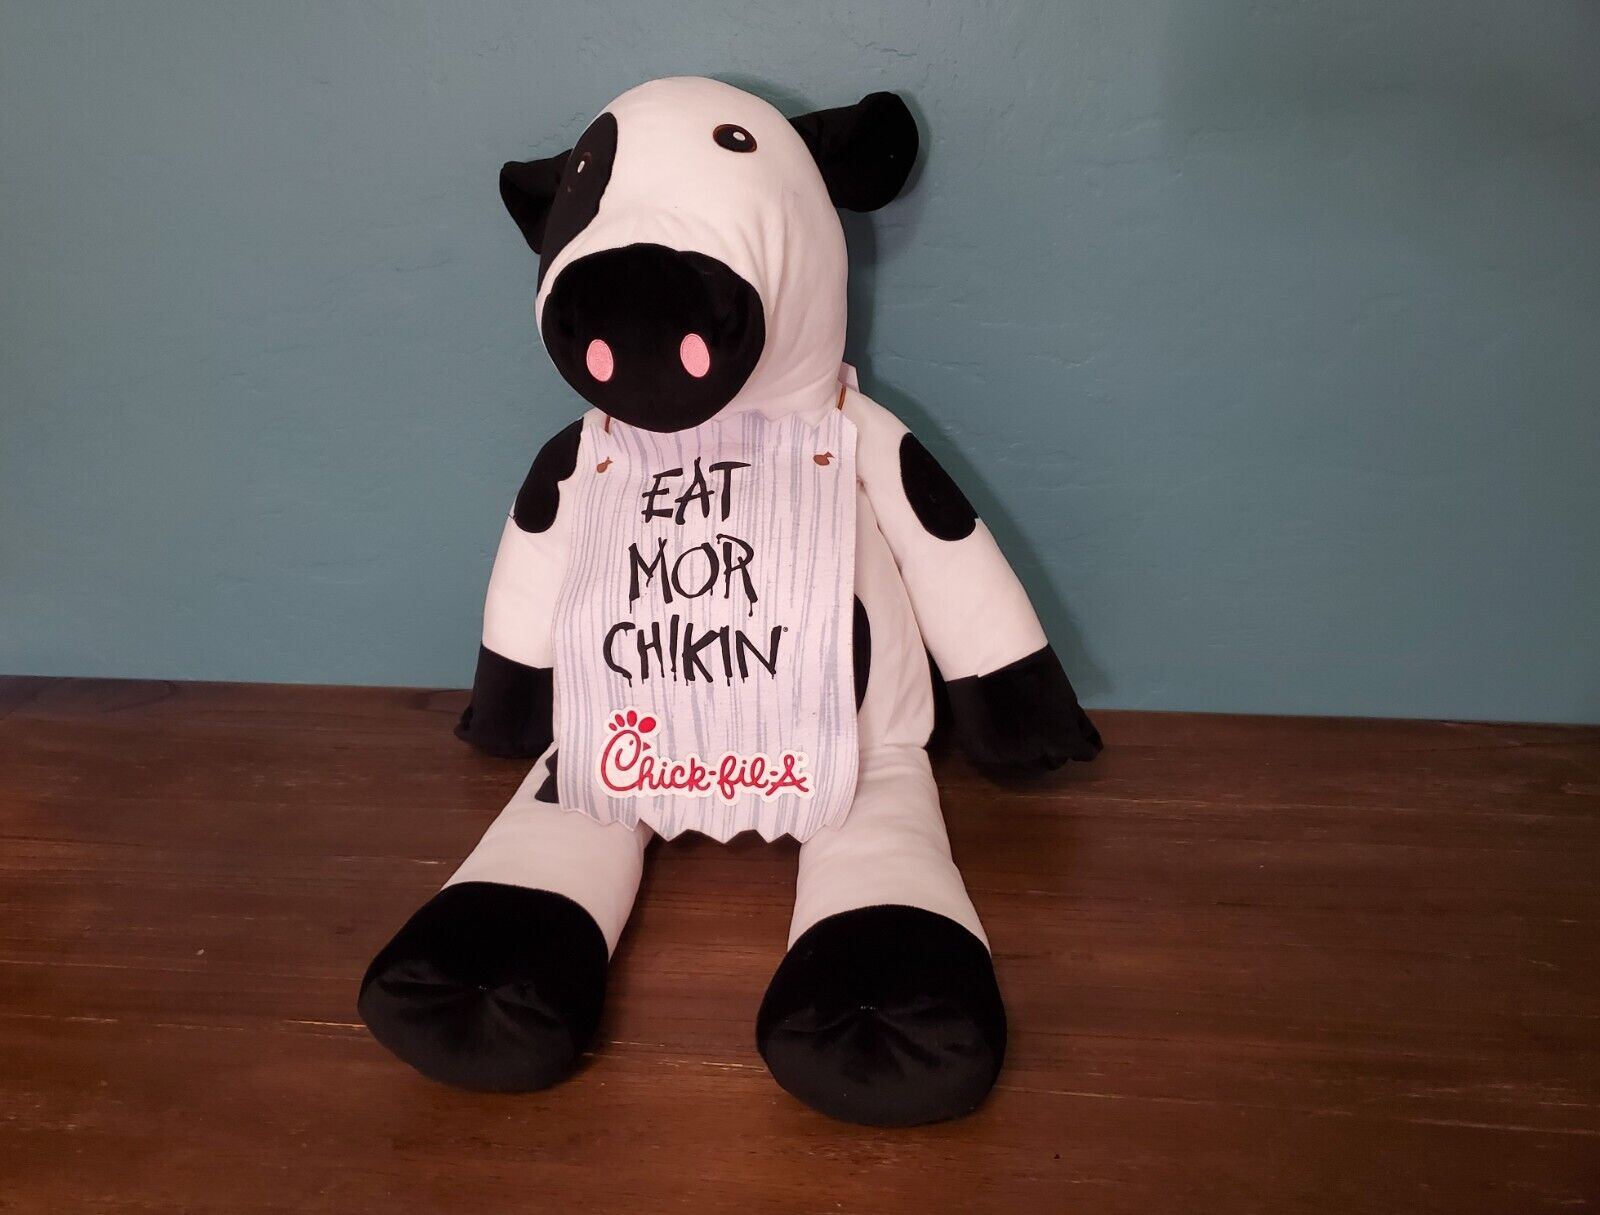 Chick-fil-a Jumbo BIG Large 33 Inch Plush Eat More Chicken Cow Store Display